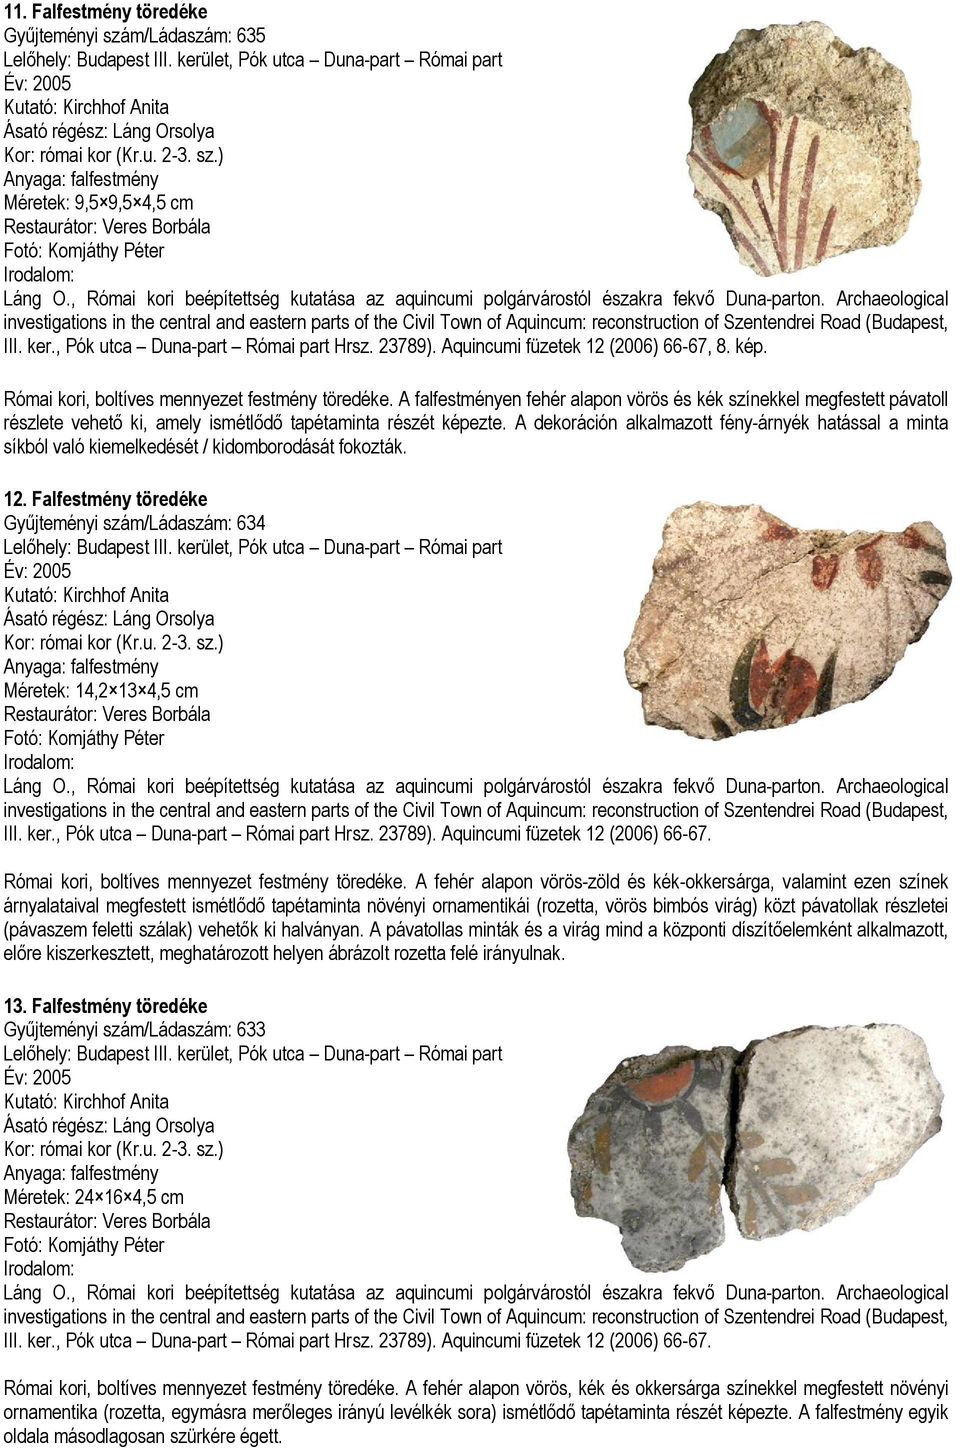 Archaeological investigations in the central and eastern parts of the Civil Town of Aquincum: reconstruction of Szentendrei Road (Budapest, III. ker., Pók utca Duna-part Római part Hrsz. 23789).